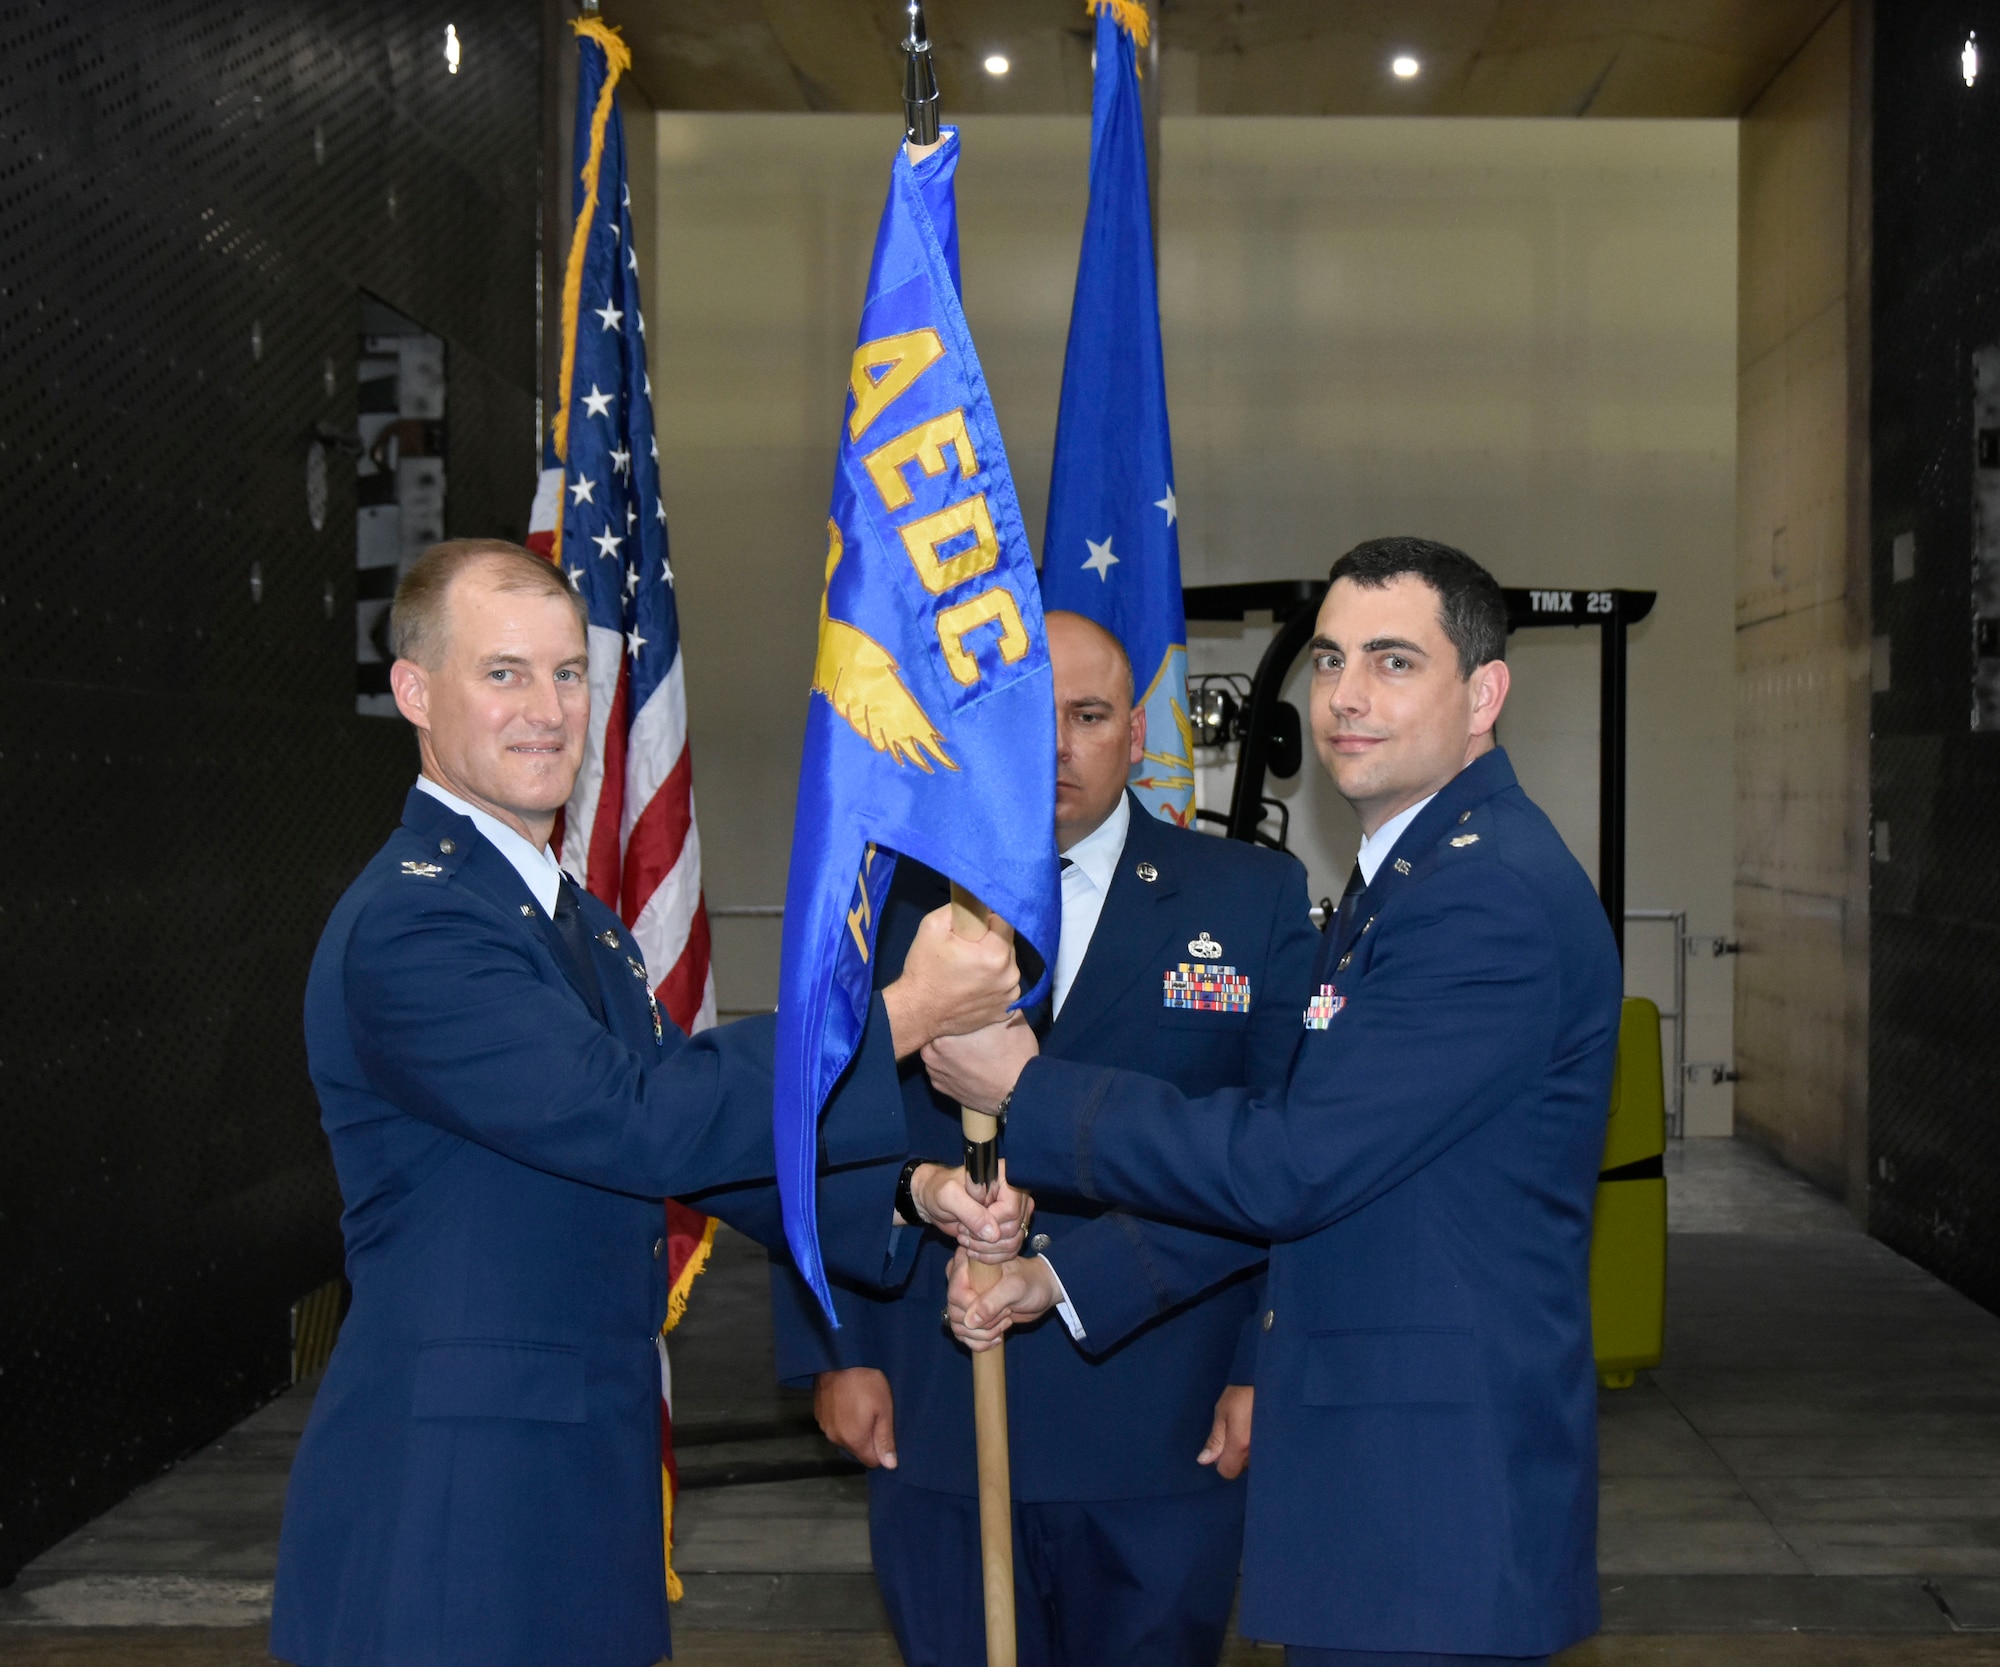 Incoming AEDC Flight Systems Combined Test Force Director Lt. Col. John McShane, right, accepts the Flight Systems CTF guidon from AEDC Test Operations Division Chief Col. Keith Roessig during a June 28 Change of Leadership ceremony in the Propulsion Wind Tunnel Model Installation Building at Arnold Air Force Base. McShane comes to Arnold from Washington, D.C., where he most recently served as a Program Element Monitor for Advanced Aircraft Technology at the Directorate of Special Programs, Assistant Secretary of the Air Force (Acquisition, Technology & Logistics), at the Pentagon. (U.S. Air Force photo by Bradley Hicks)